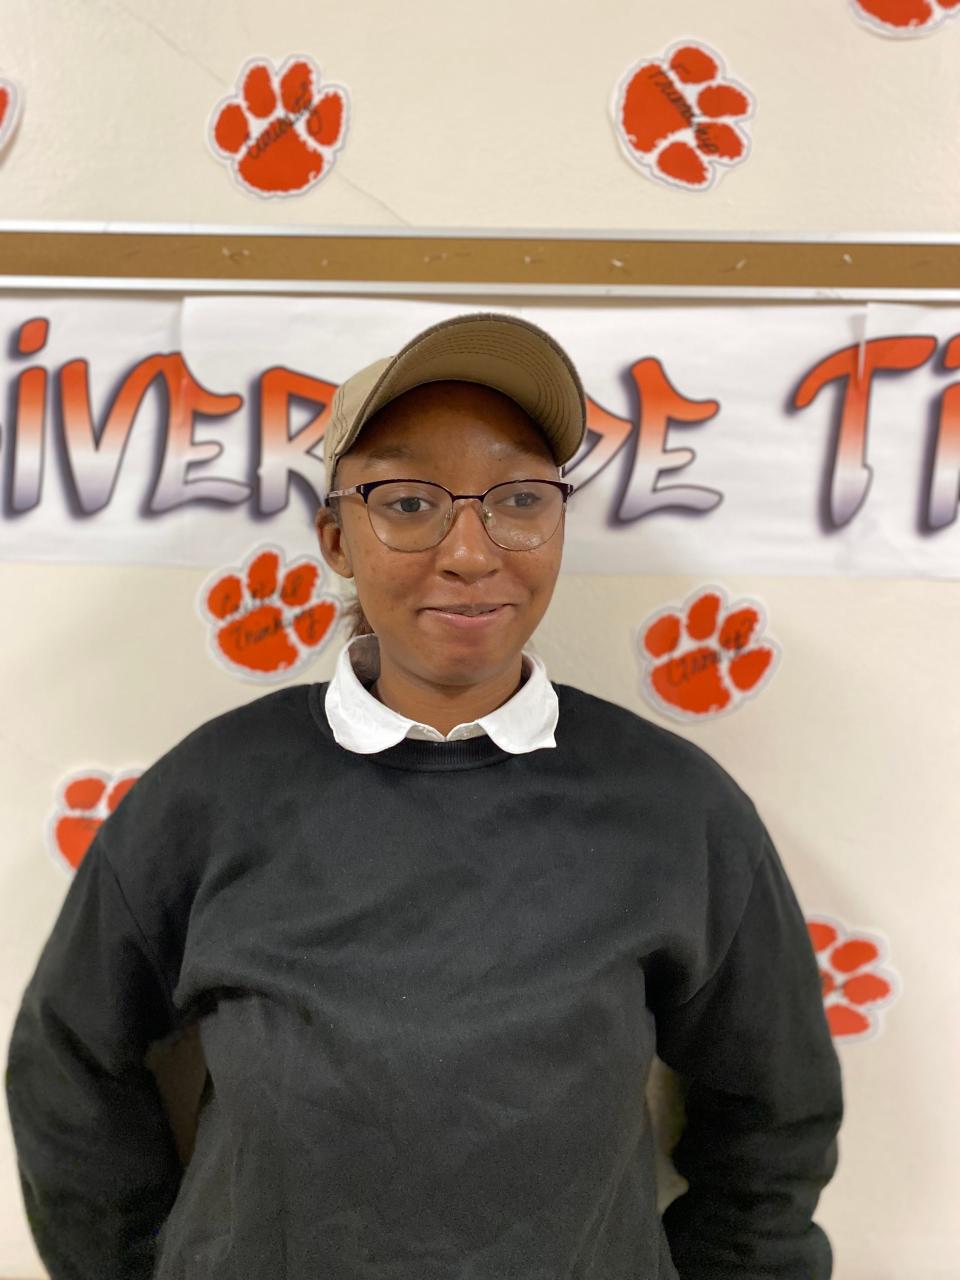 Eleventh grader Tatiyana Dockery won first place in the 2022 Dr. Martin Luther King, Jr. Writing Contest. "My peace is a world in which people appreciate me for who I am as a person, regardless of race," she wrote.